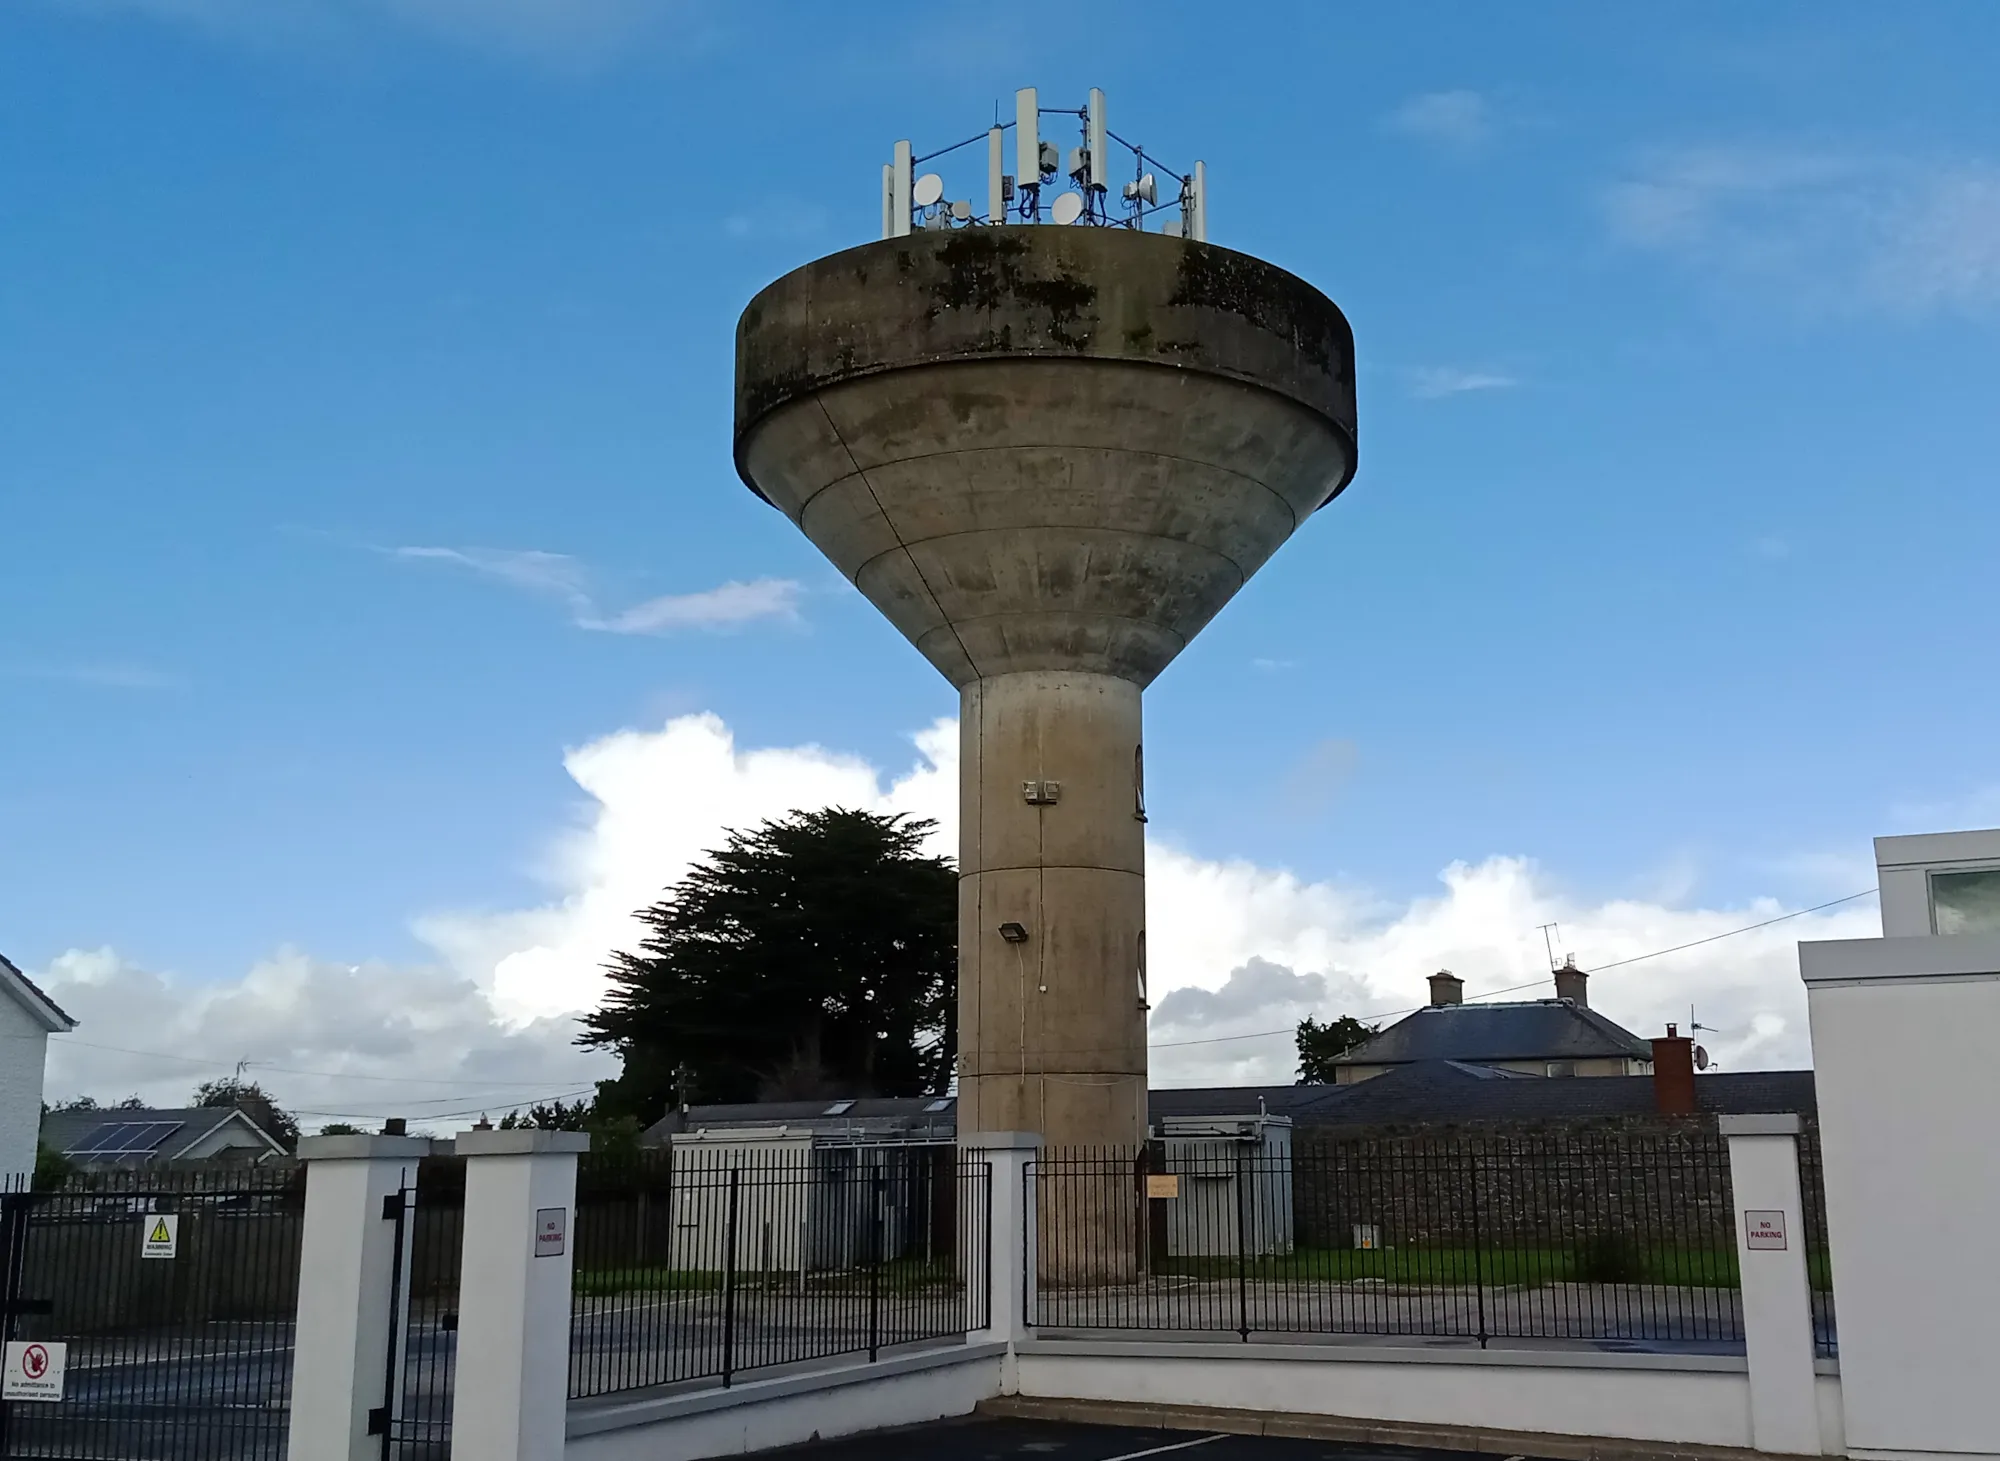 Photo showing: One of the water towers behind the Fire Station in Callan